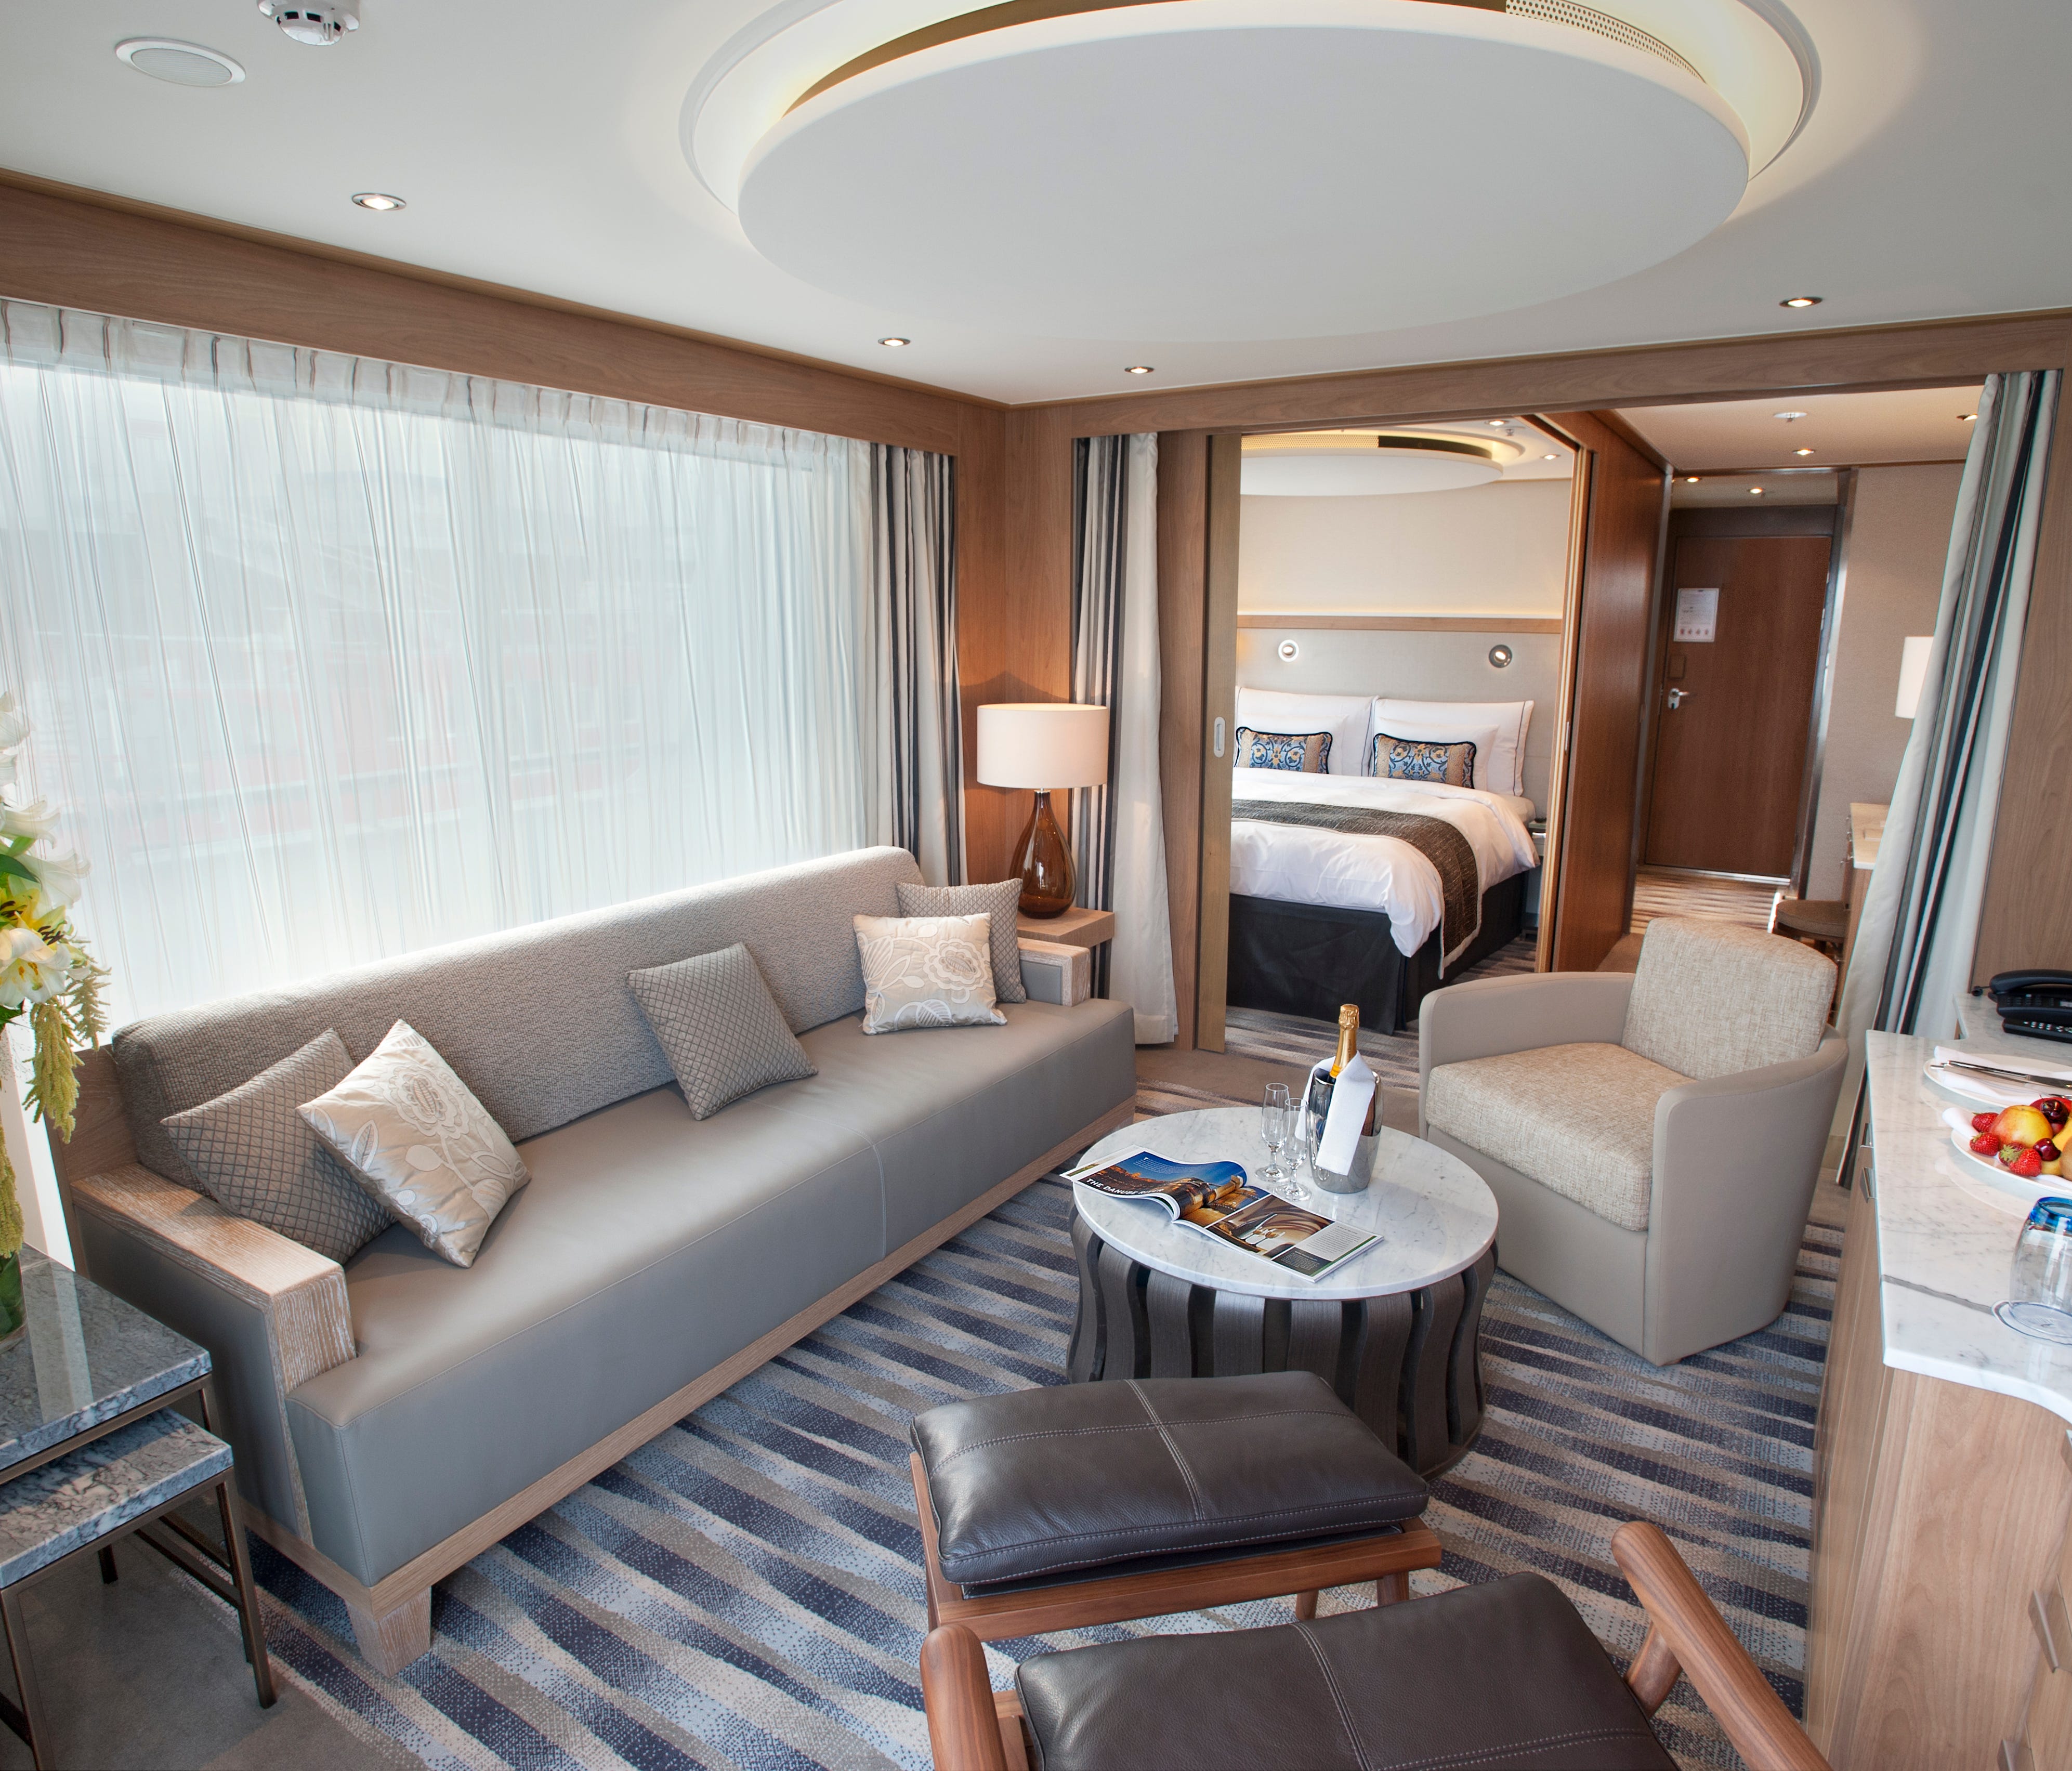 Explorer's Suites are among the top accommodations on Viking River Cruises vessels in Europe.